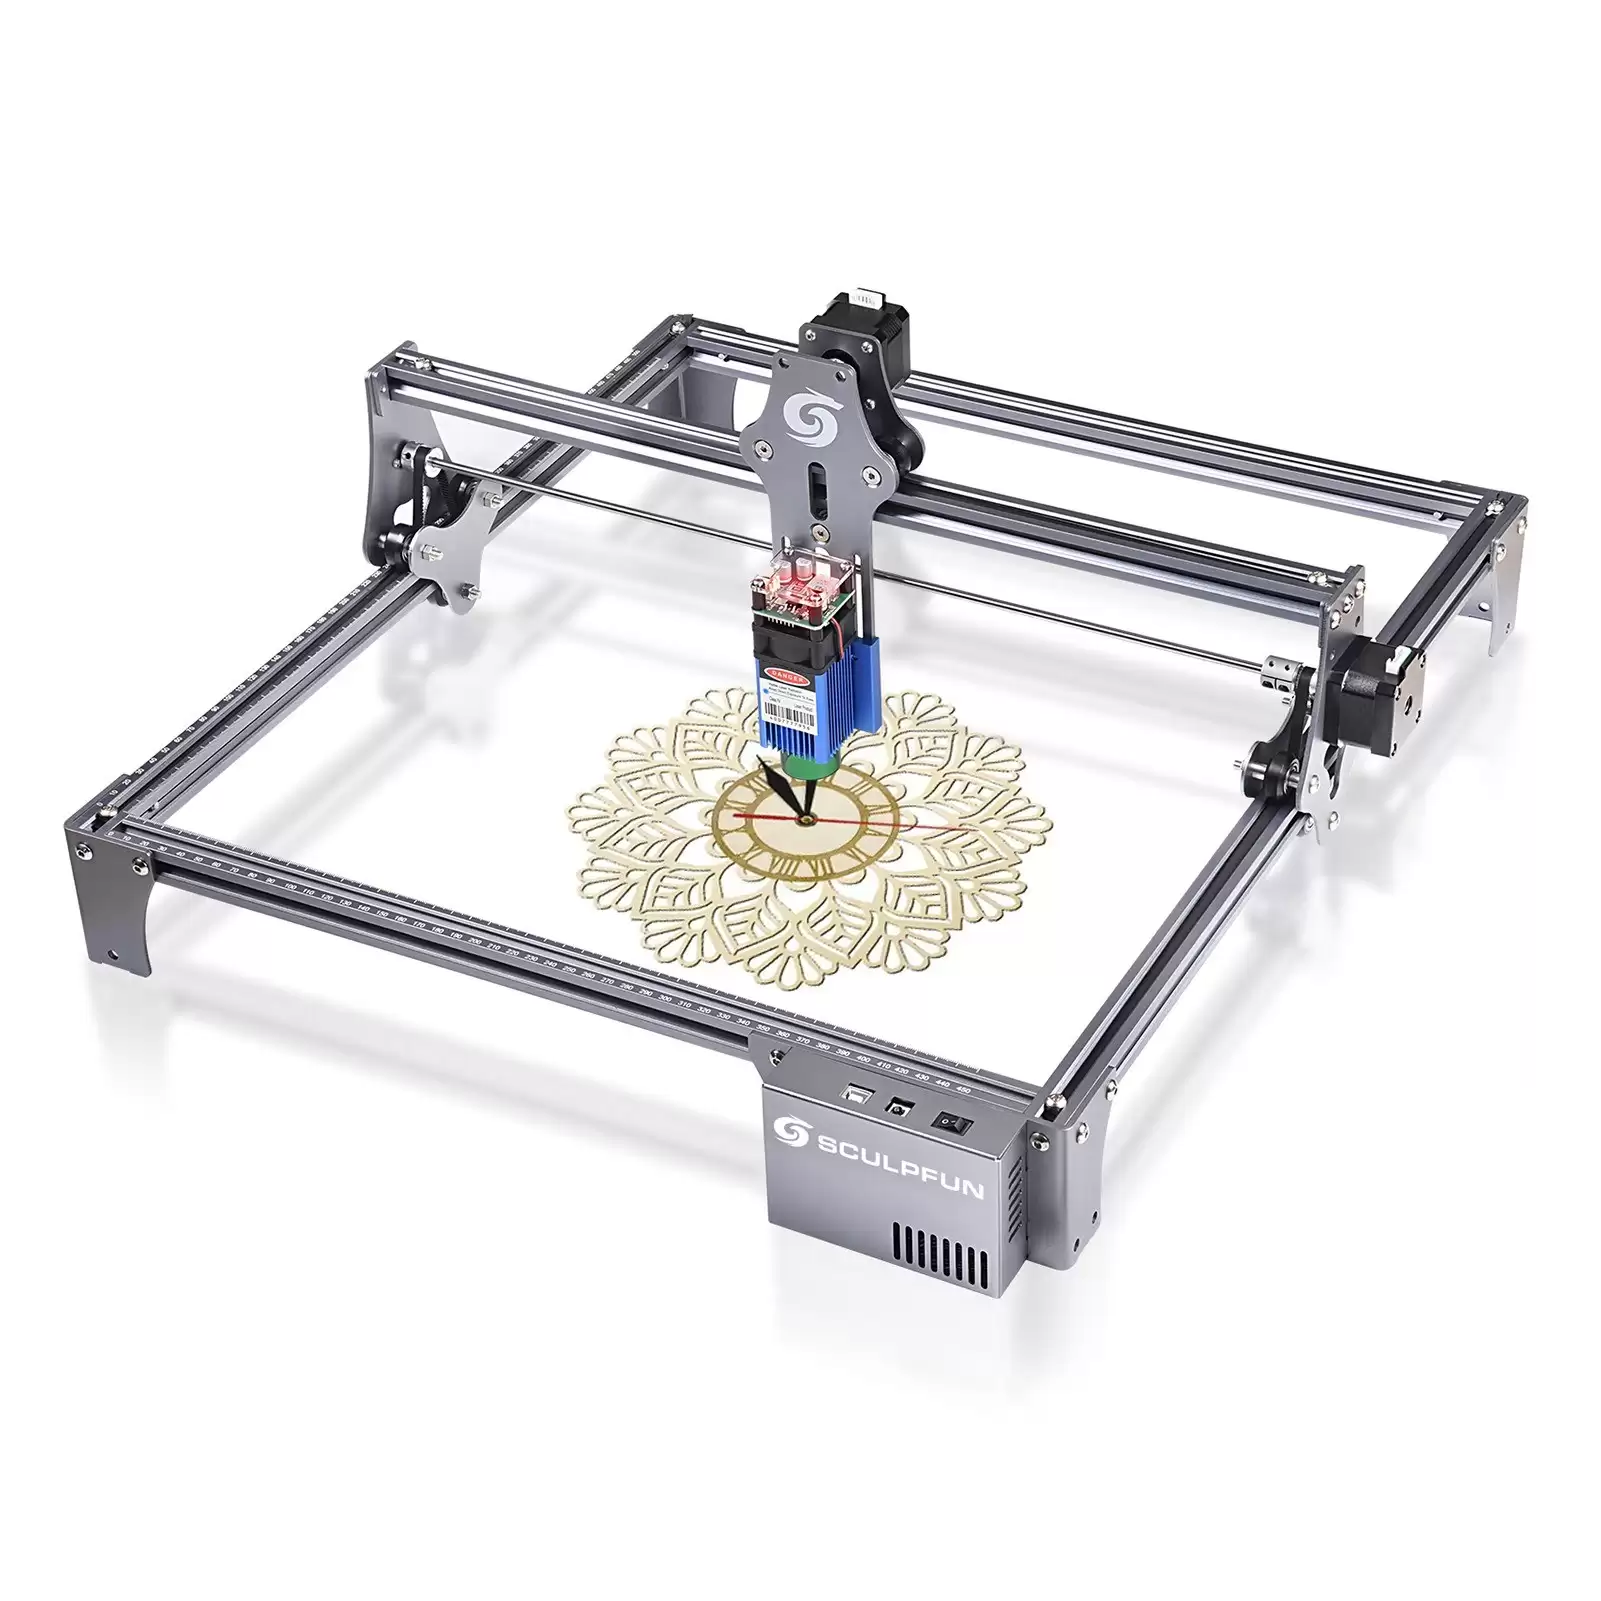 Order In Just $315 [Eu Warehouse] $114 Off Sculpfun S6 Pro Spot Compressed Laser Engraver, Free Shipping At Tomtop